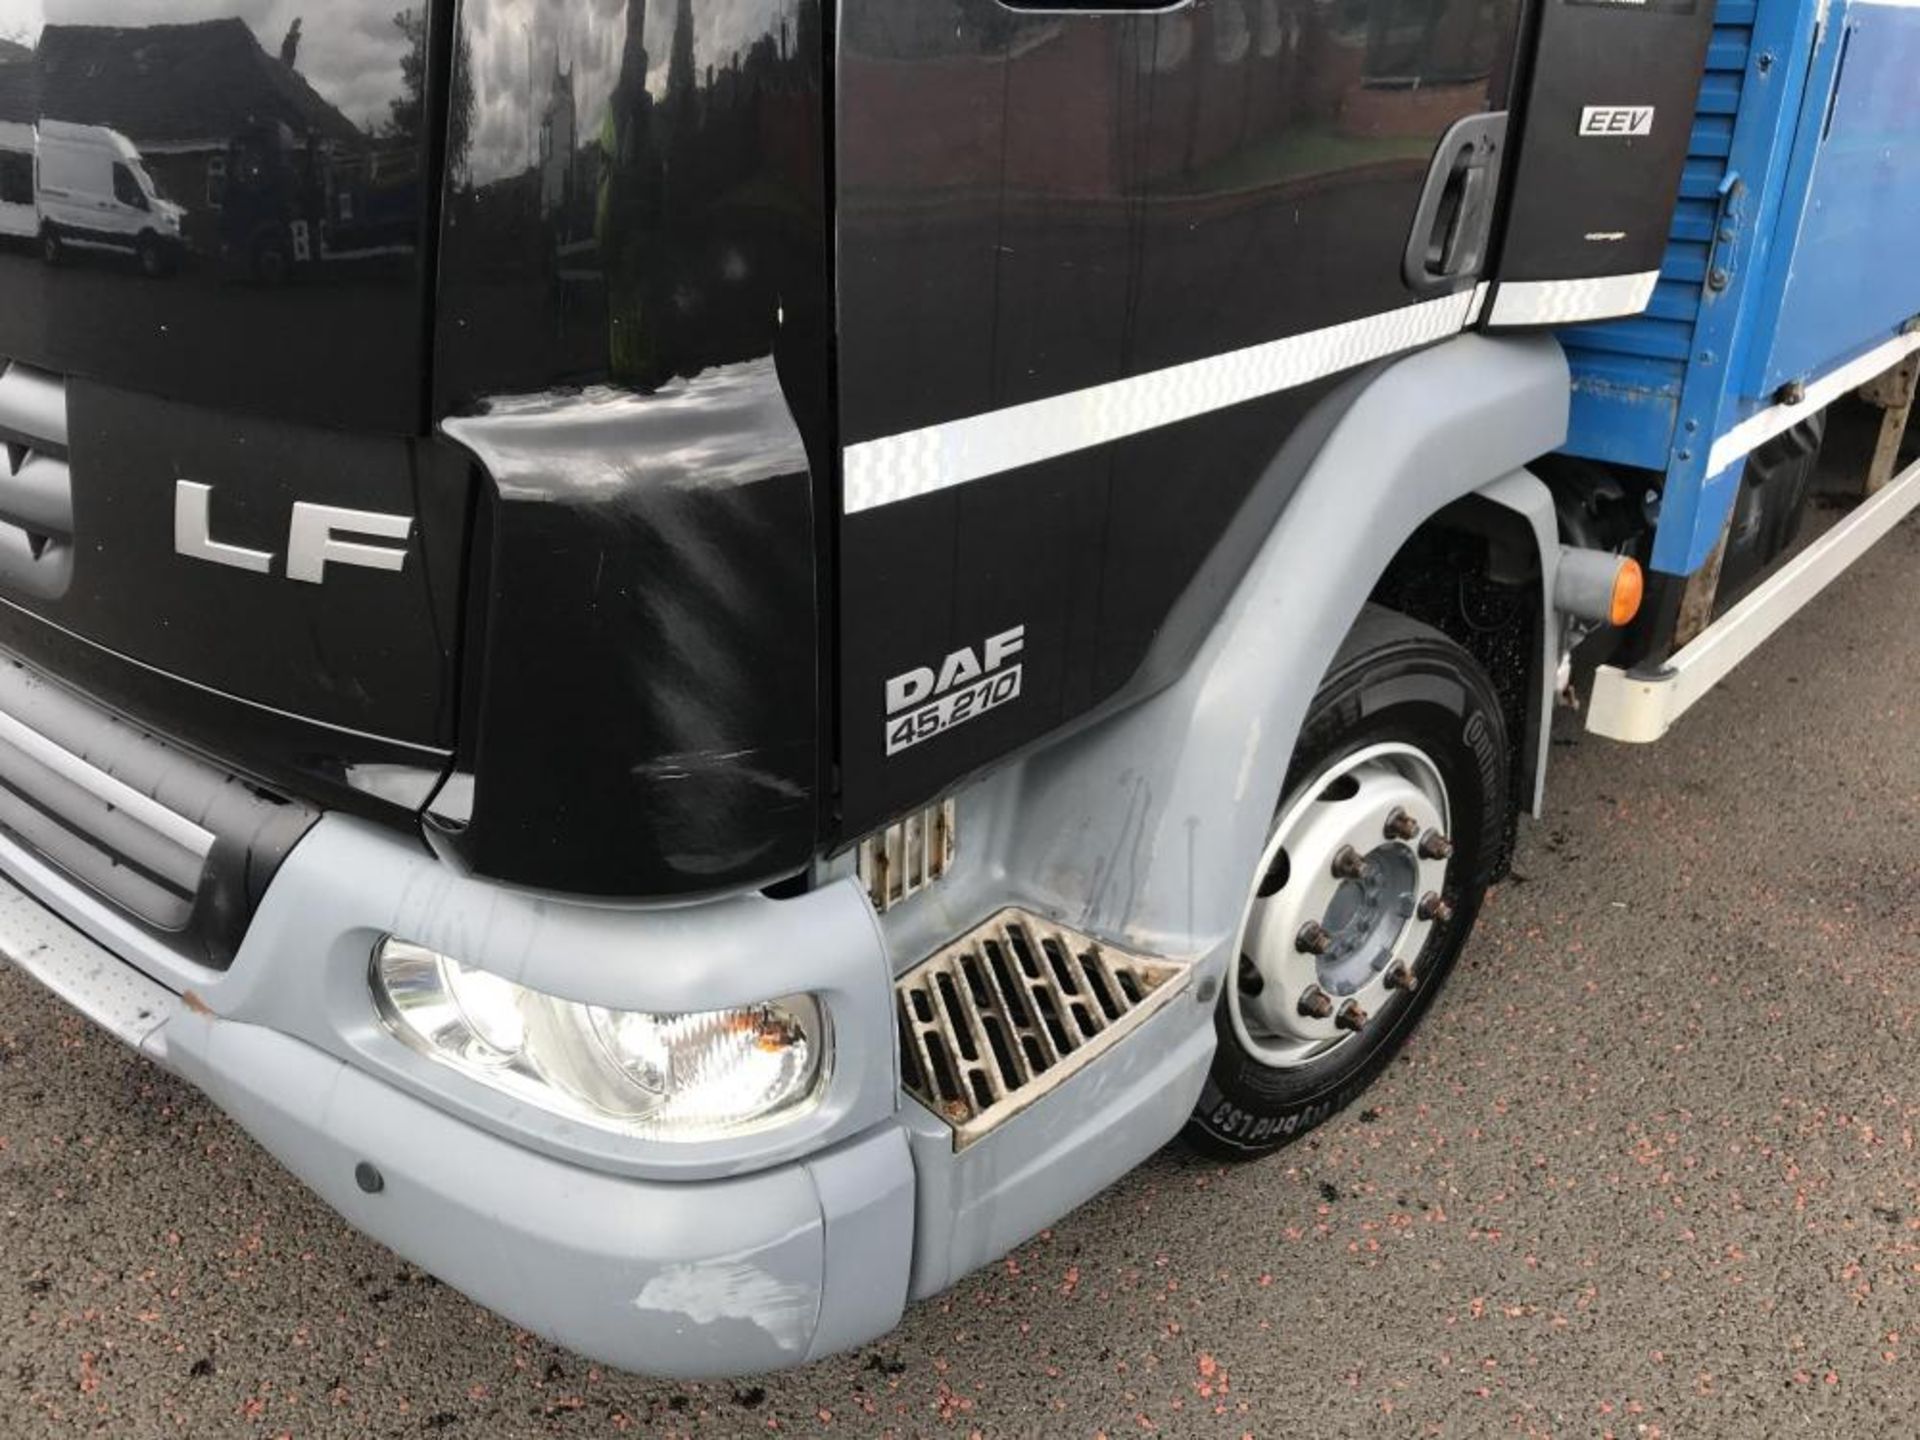 2013/13 REG DAF TRUCKS LF FA 45.210 12 TON ALLOY DROP SIDE TRUCK WITH TAIL LIFT 23FT AIR SUSPENSION - Image 6 of 14